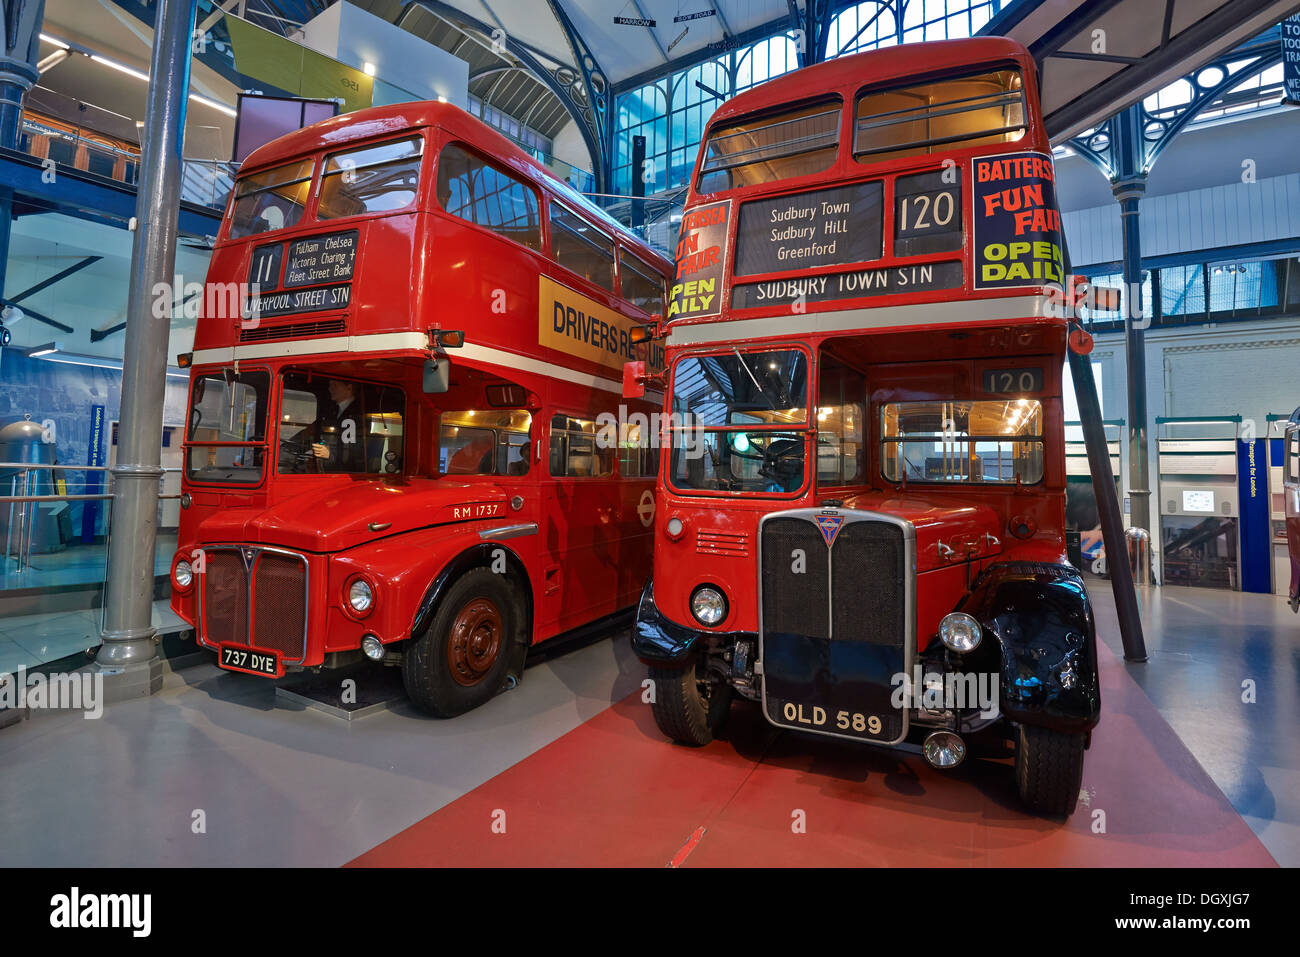 The London Transport Museum, or LT Museum based in Covent Garden, London Stock Photo